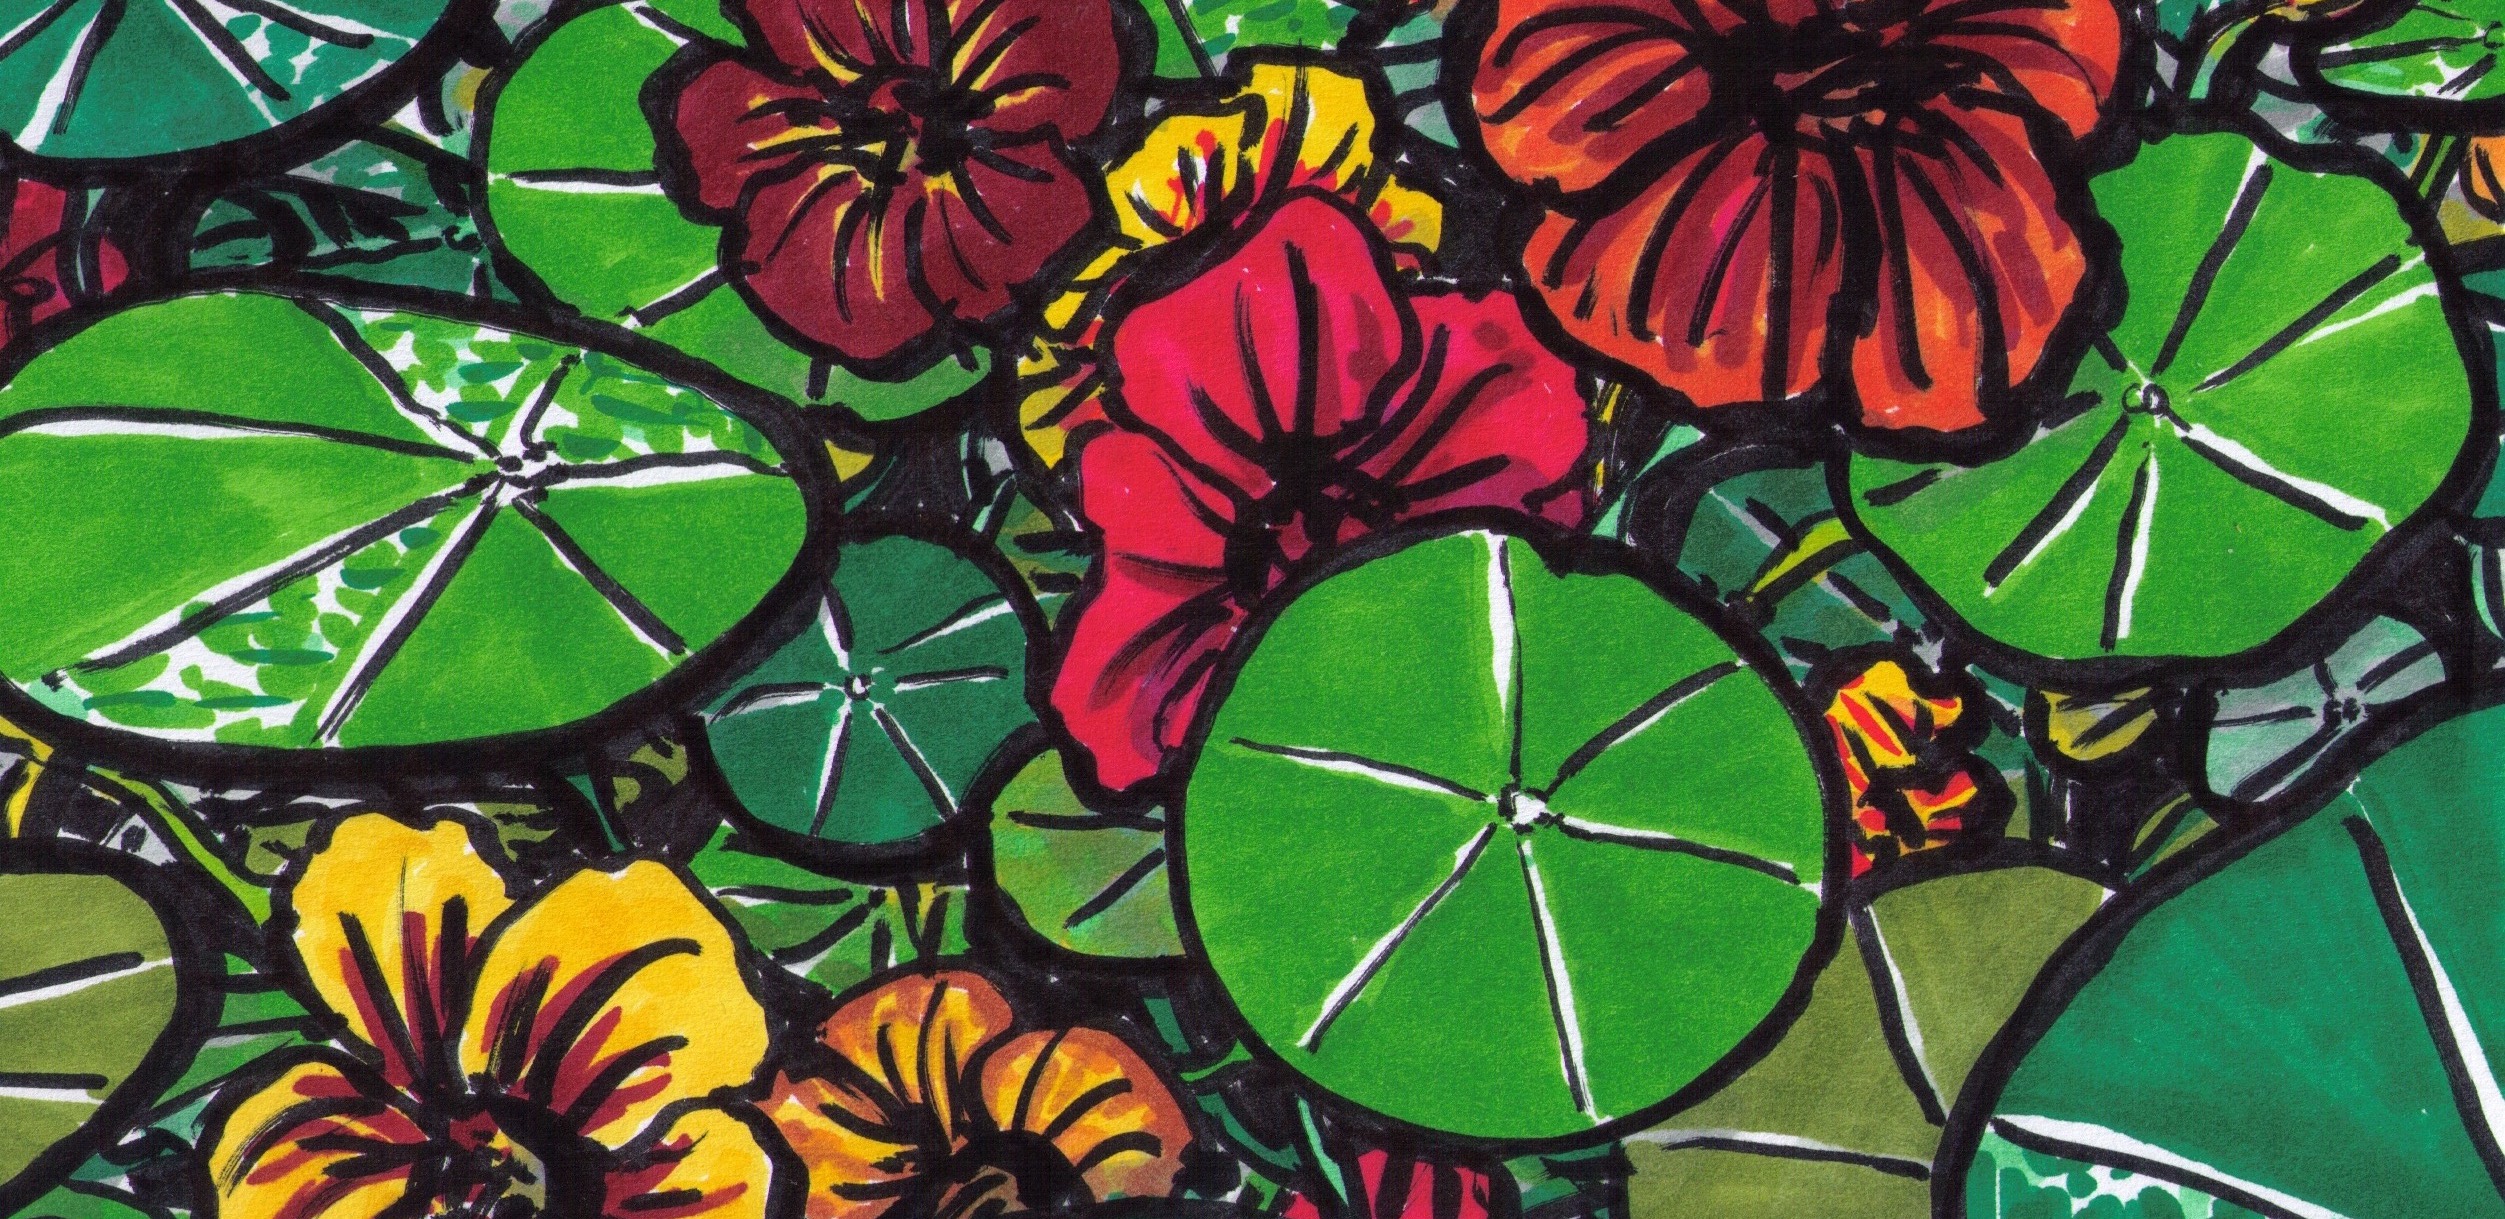 Marker drawing of a tide of nasturtium flowers and leaves growing over each other